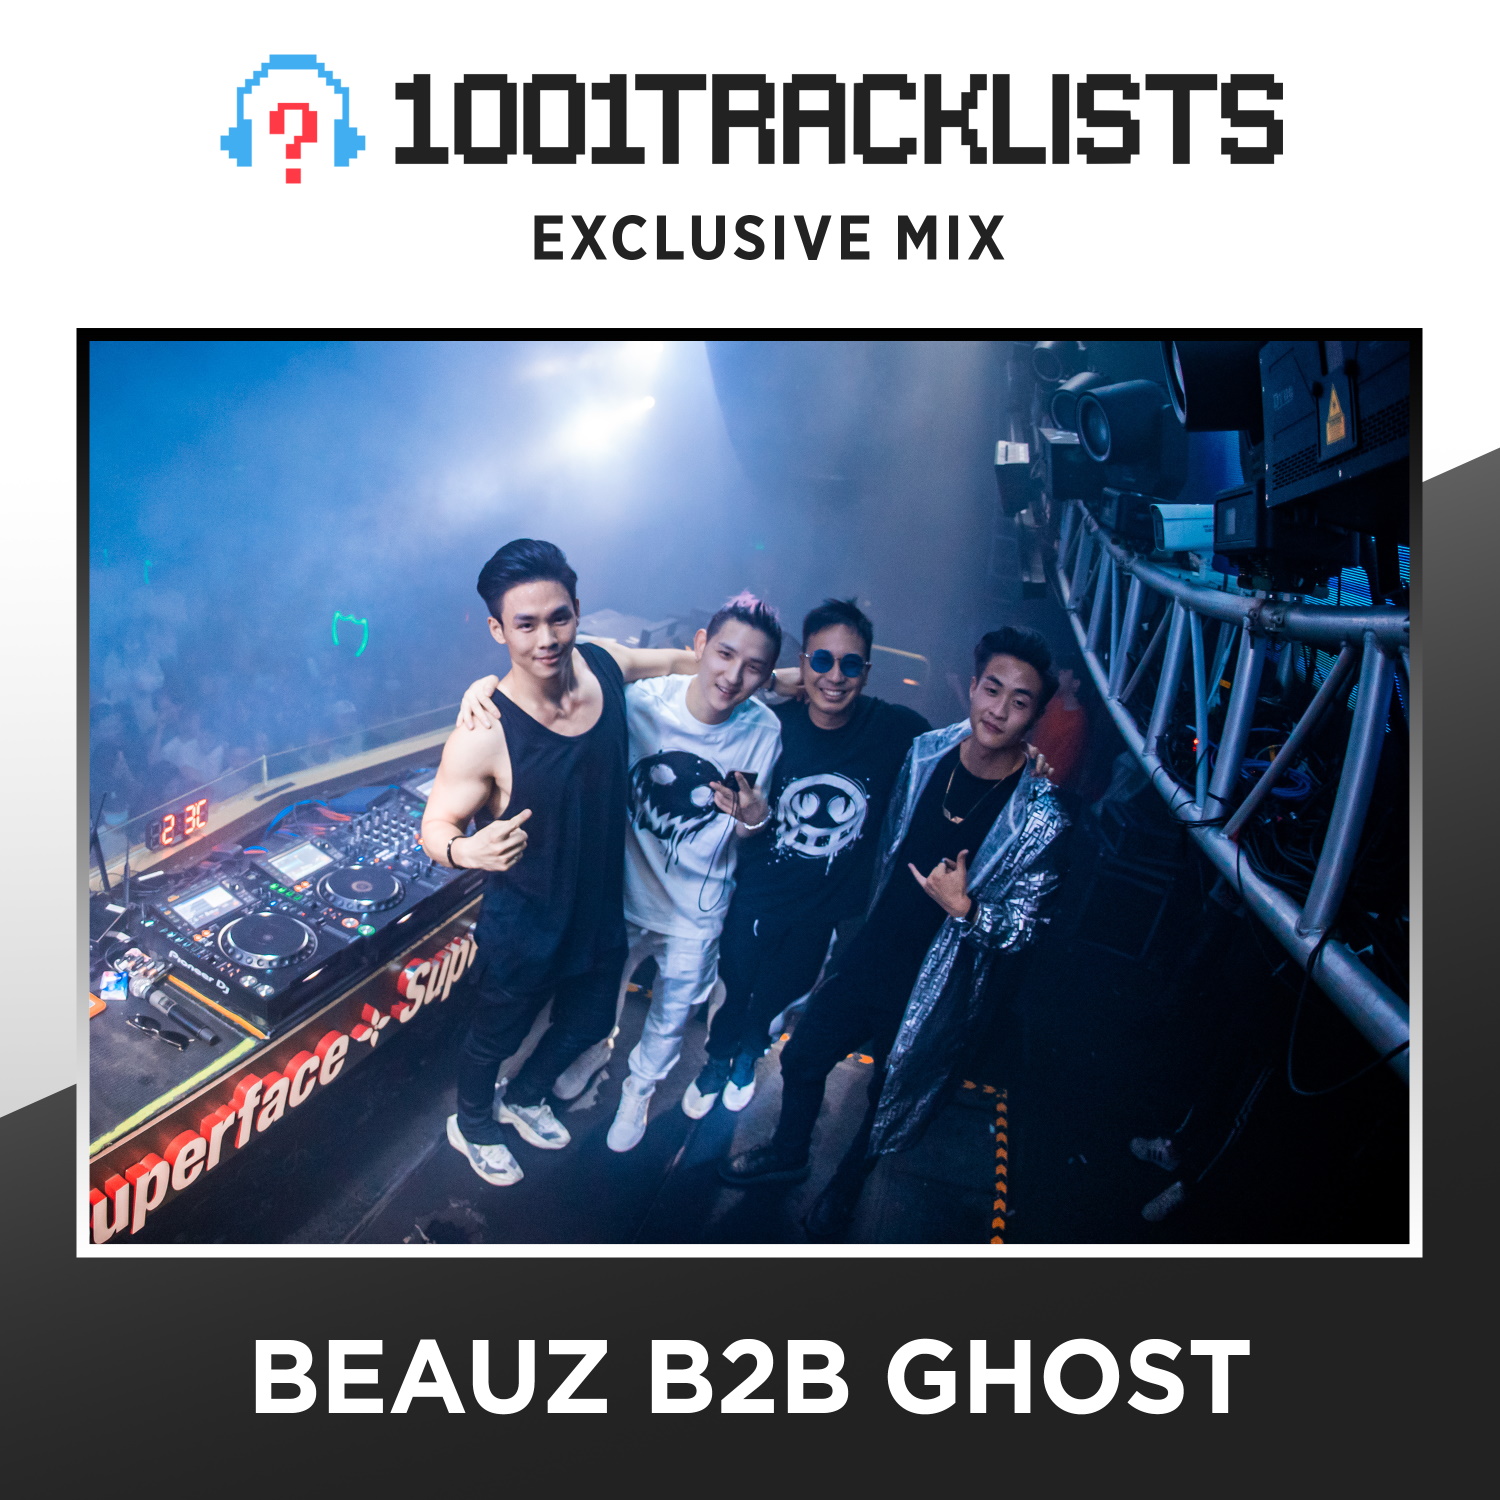 Beauz B2b Ghost 1001tracklists Exclusive Mix Scraper for fetching content from 1001tracklists.com. 1001tracklists exclusive mixes podbean